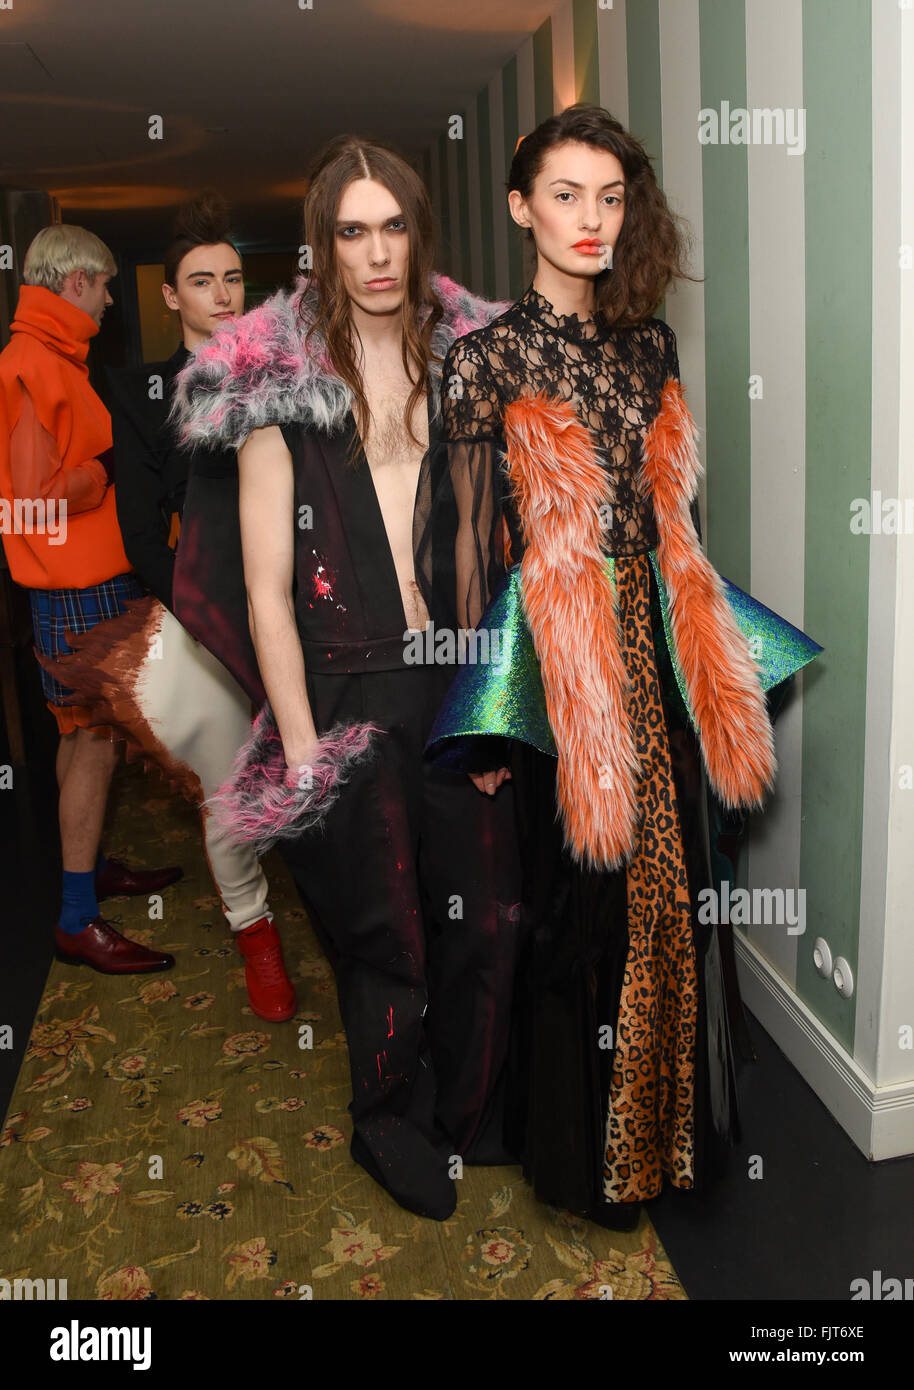 The Zoolander No. 2 Fashion Awards sponsored by Paramount Pictures Germany and Akademie Mode & Design (AMD) in Prenzlauer Berg.  Featuring: Models Where: Berlin, Germany When: 01 Feb 2016 Stock Photo